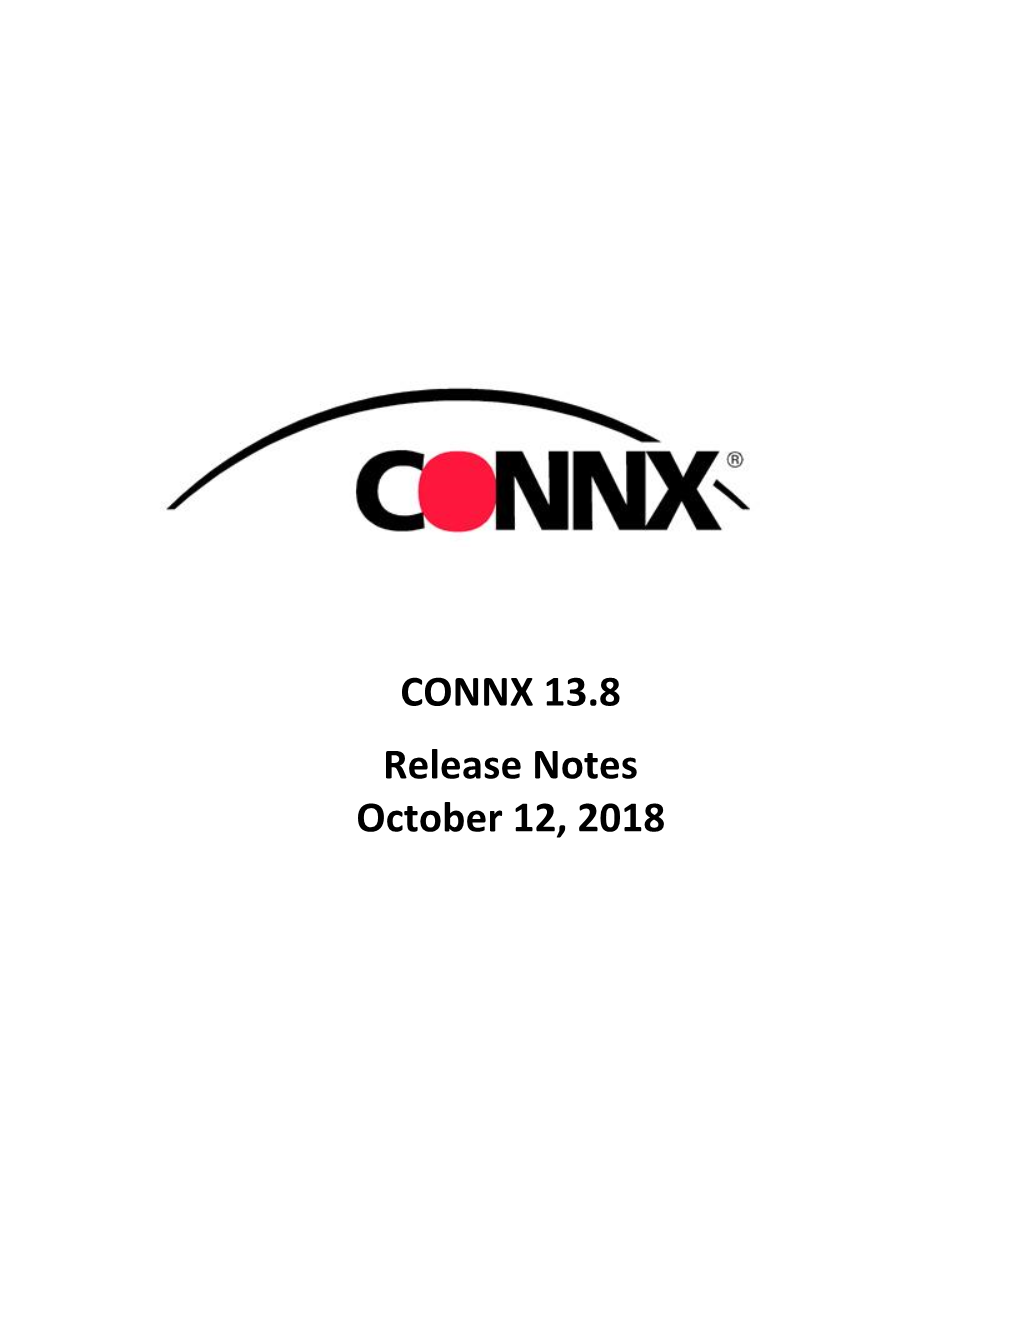 CONNX 13.8 Release Notes October 12, 2018